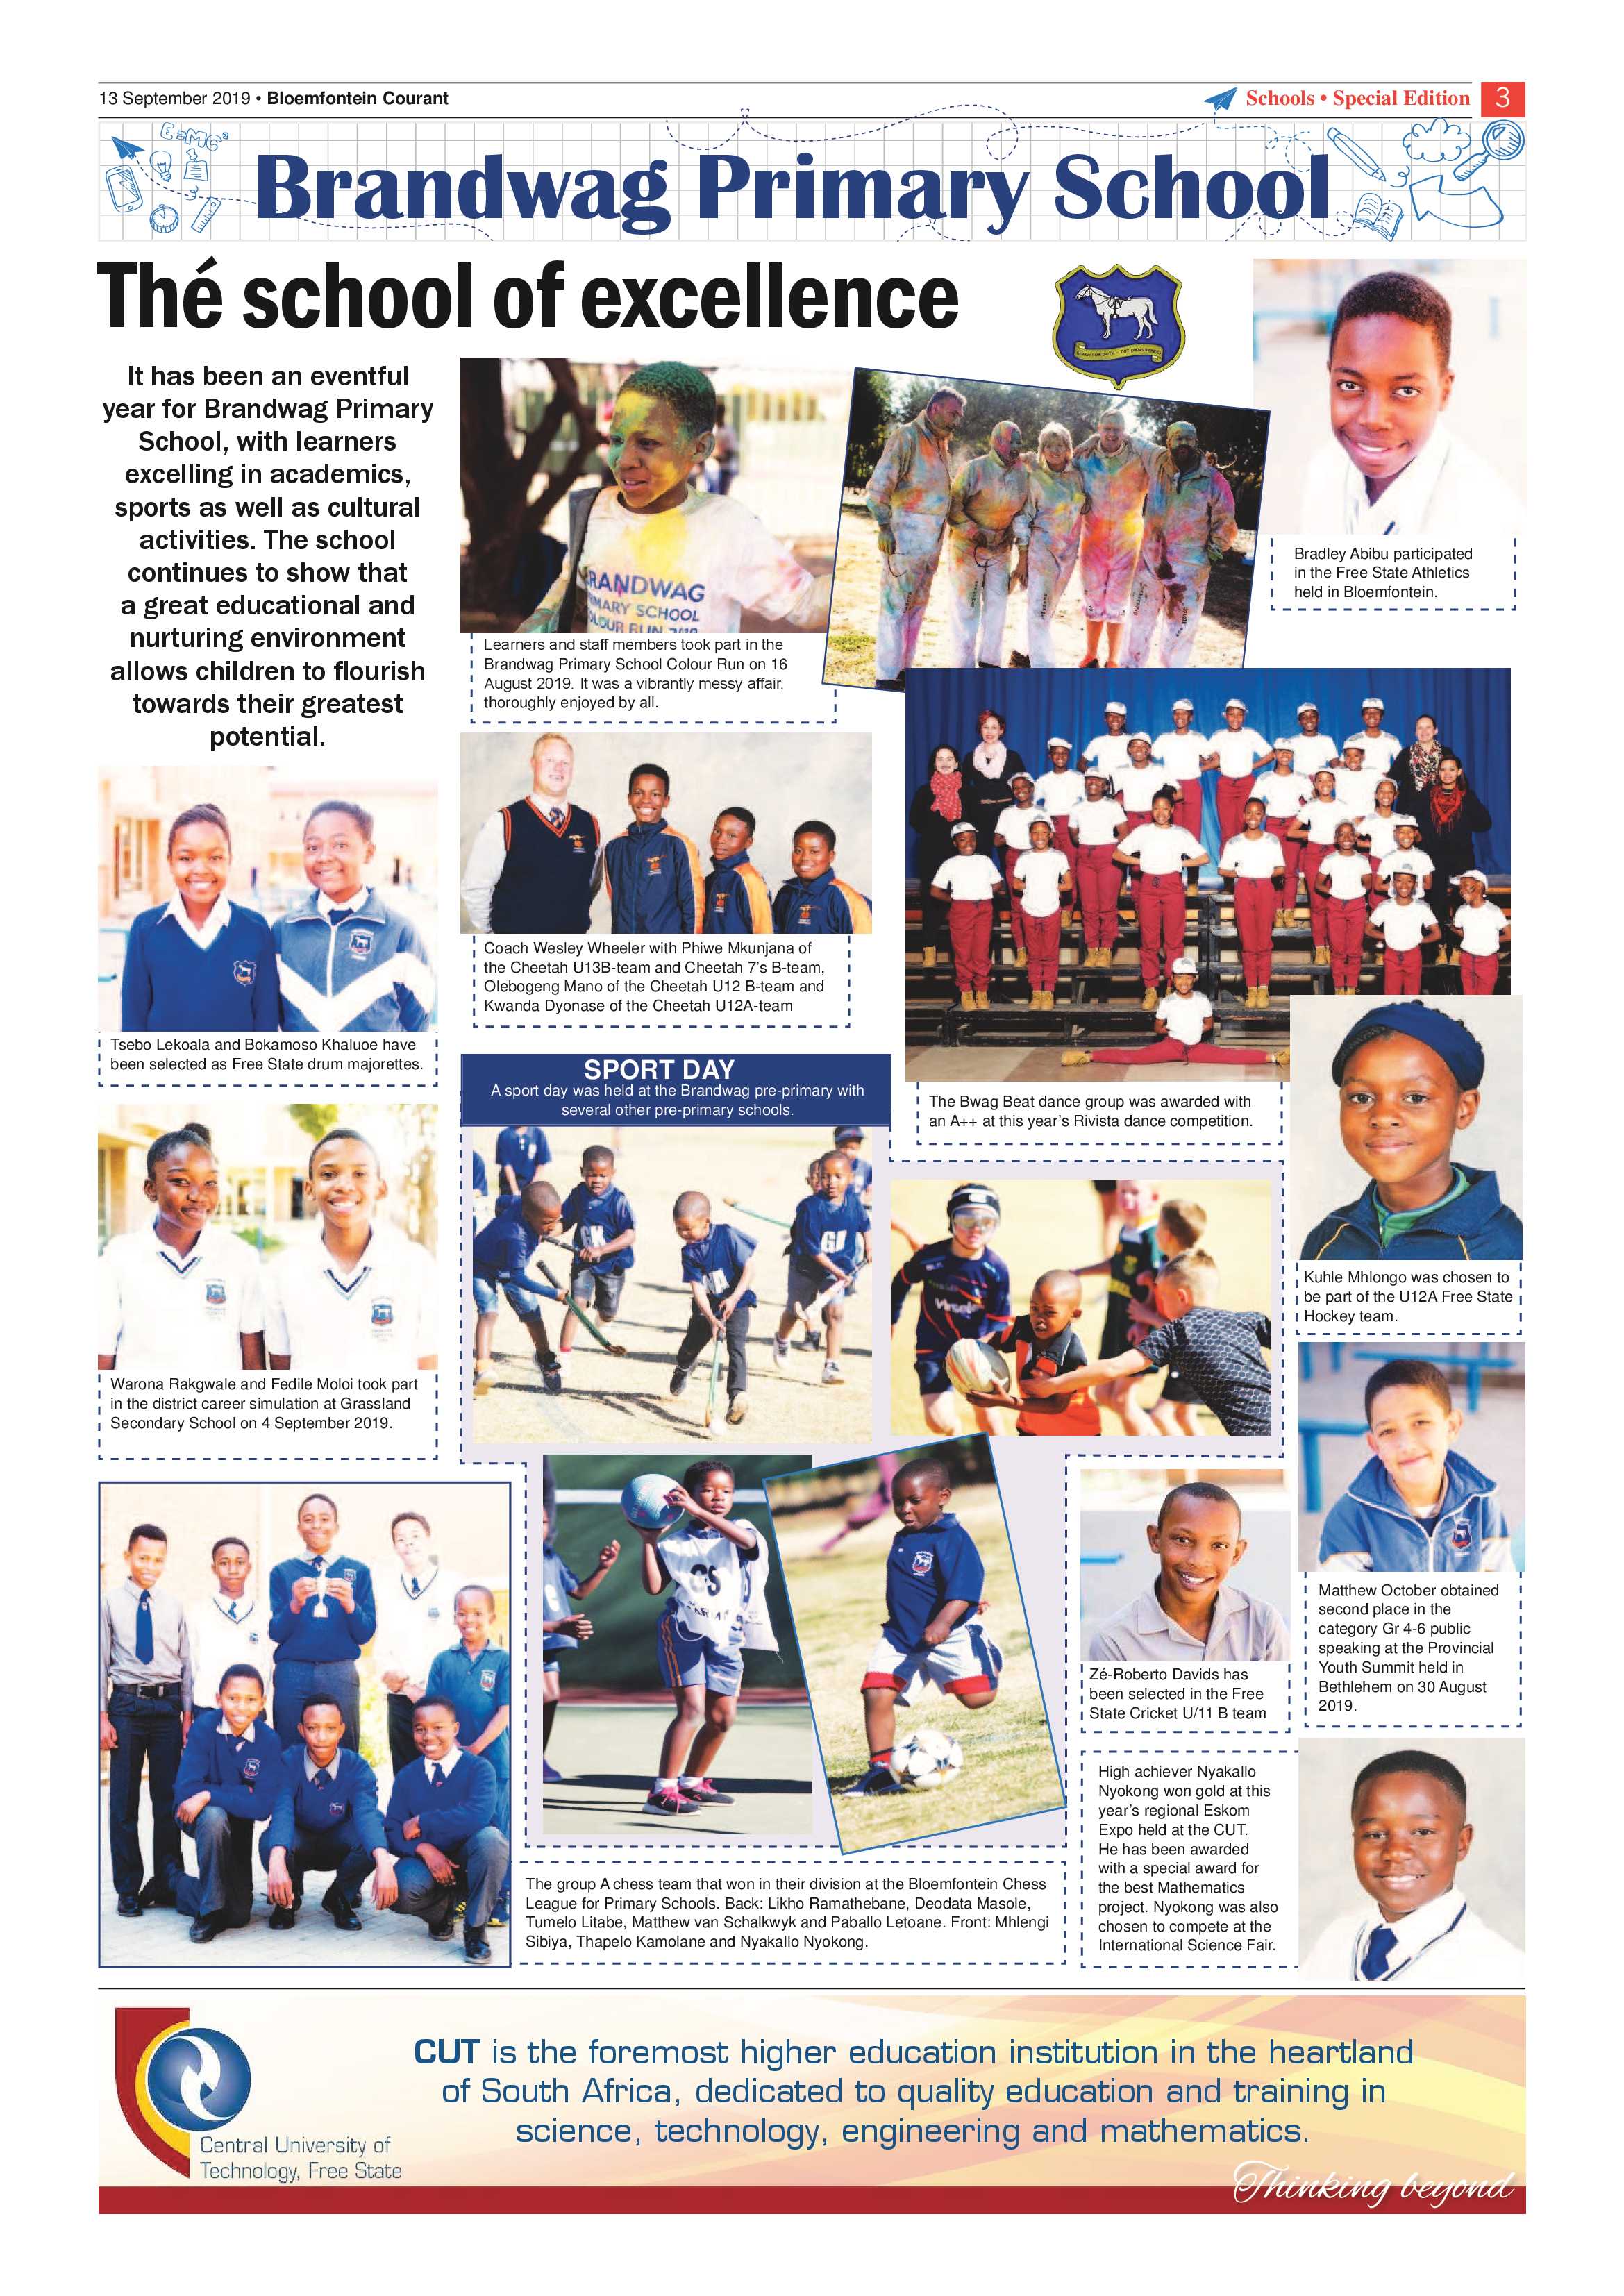 courant-13-june-2019-school-special-edition-epapers-page-3